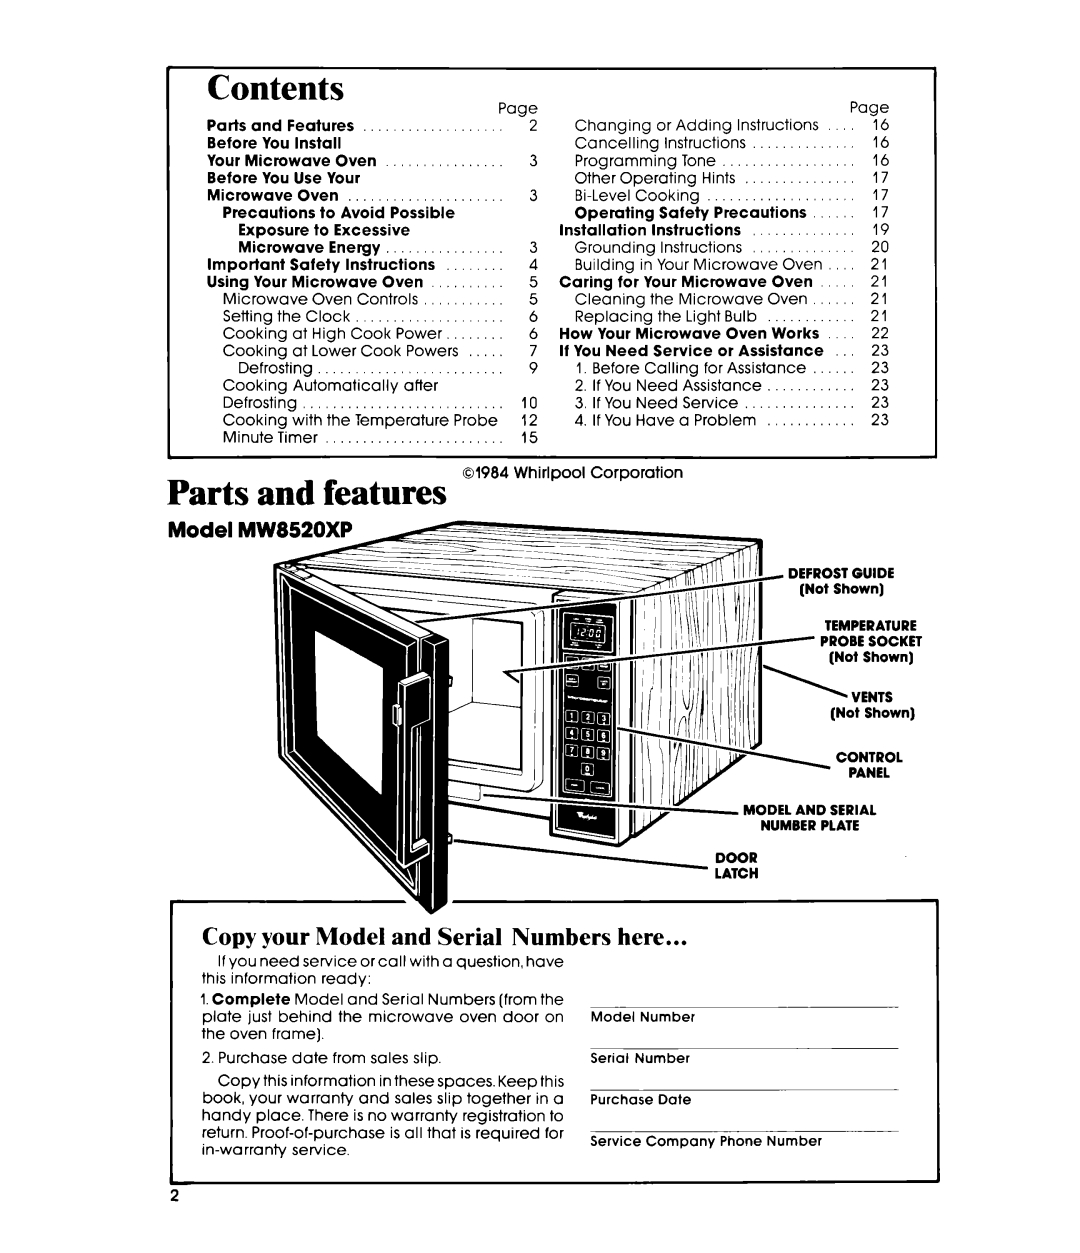 Whirlpool MW8520XP manual Contents, Parts and features, jipy, +“Ep, Copy your Model and Serial Numbers here 